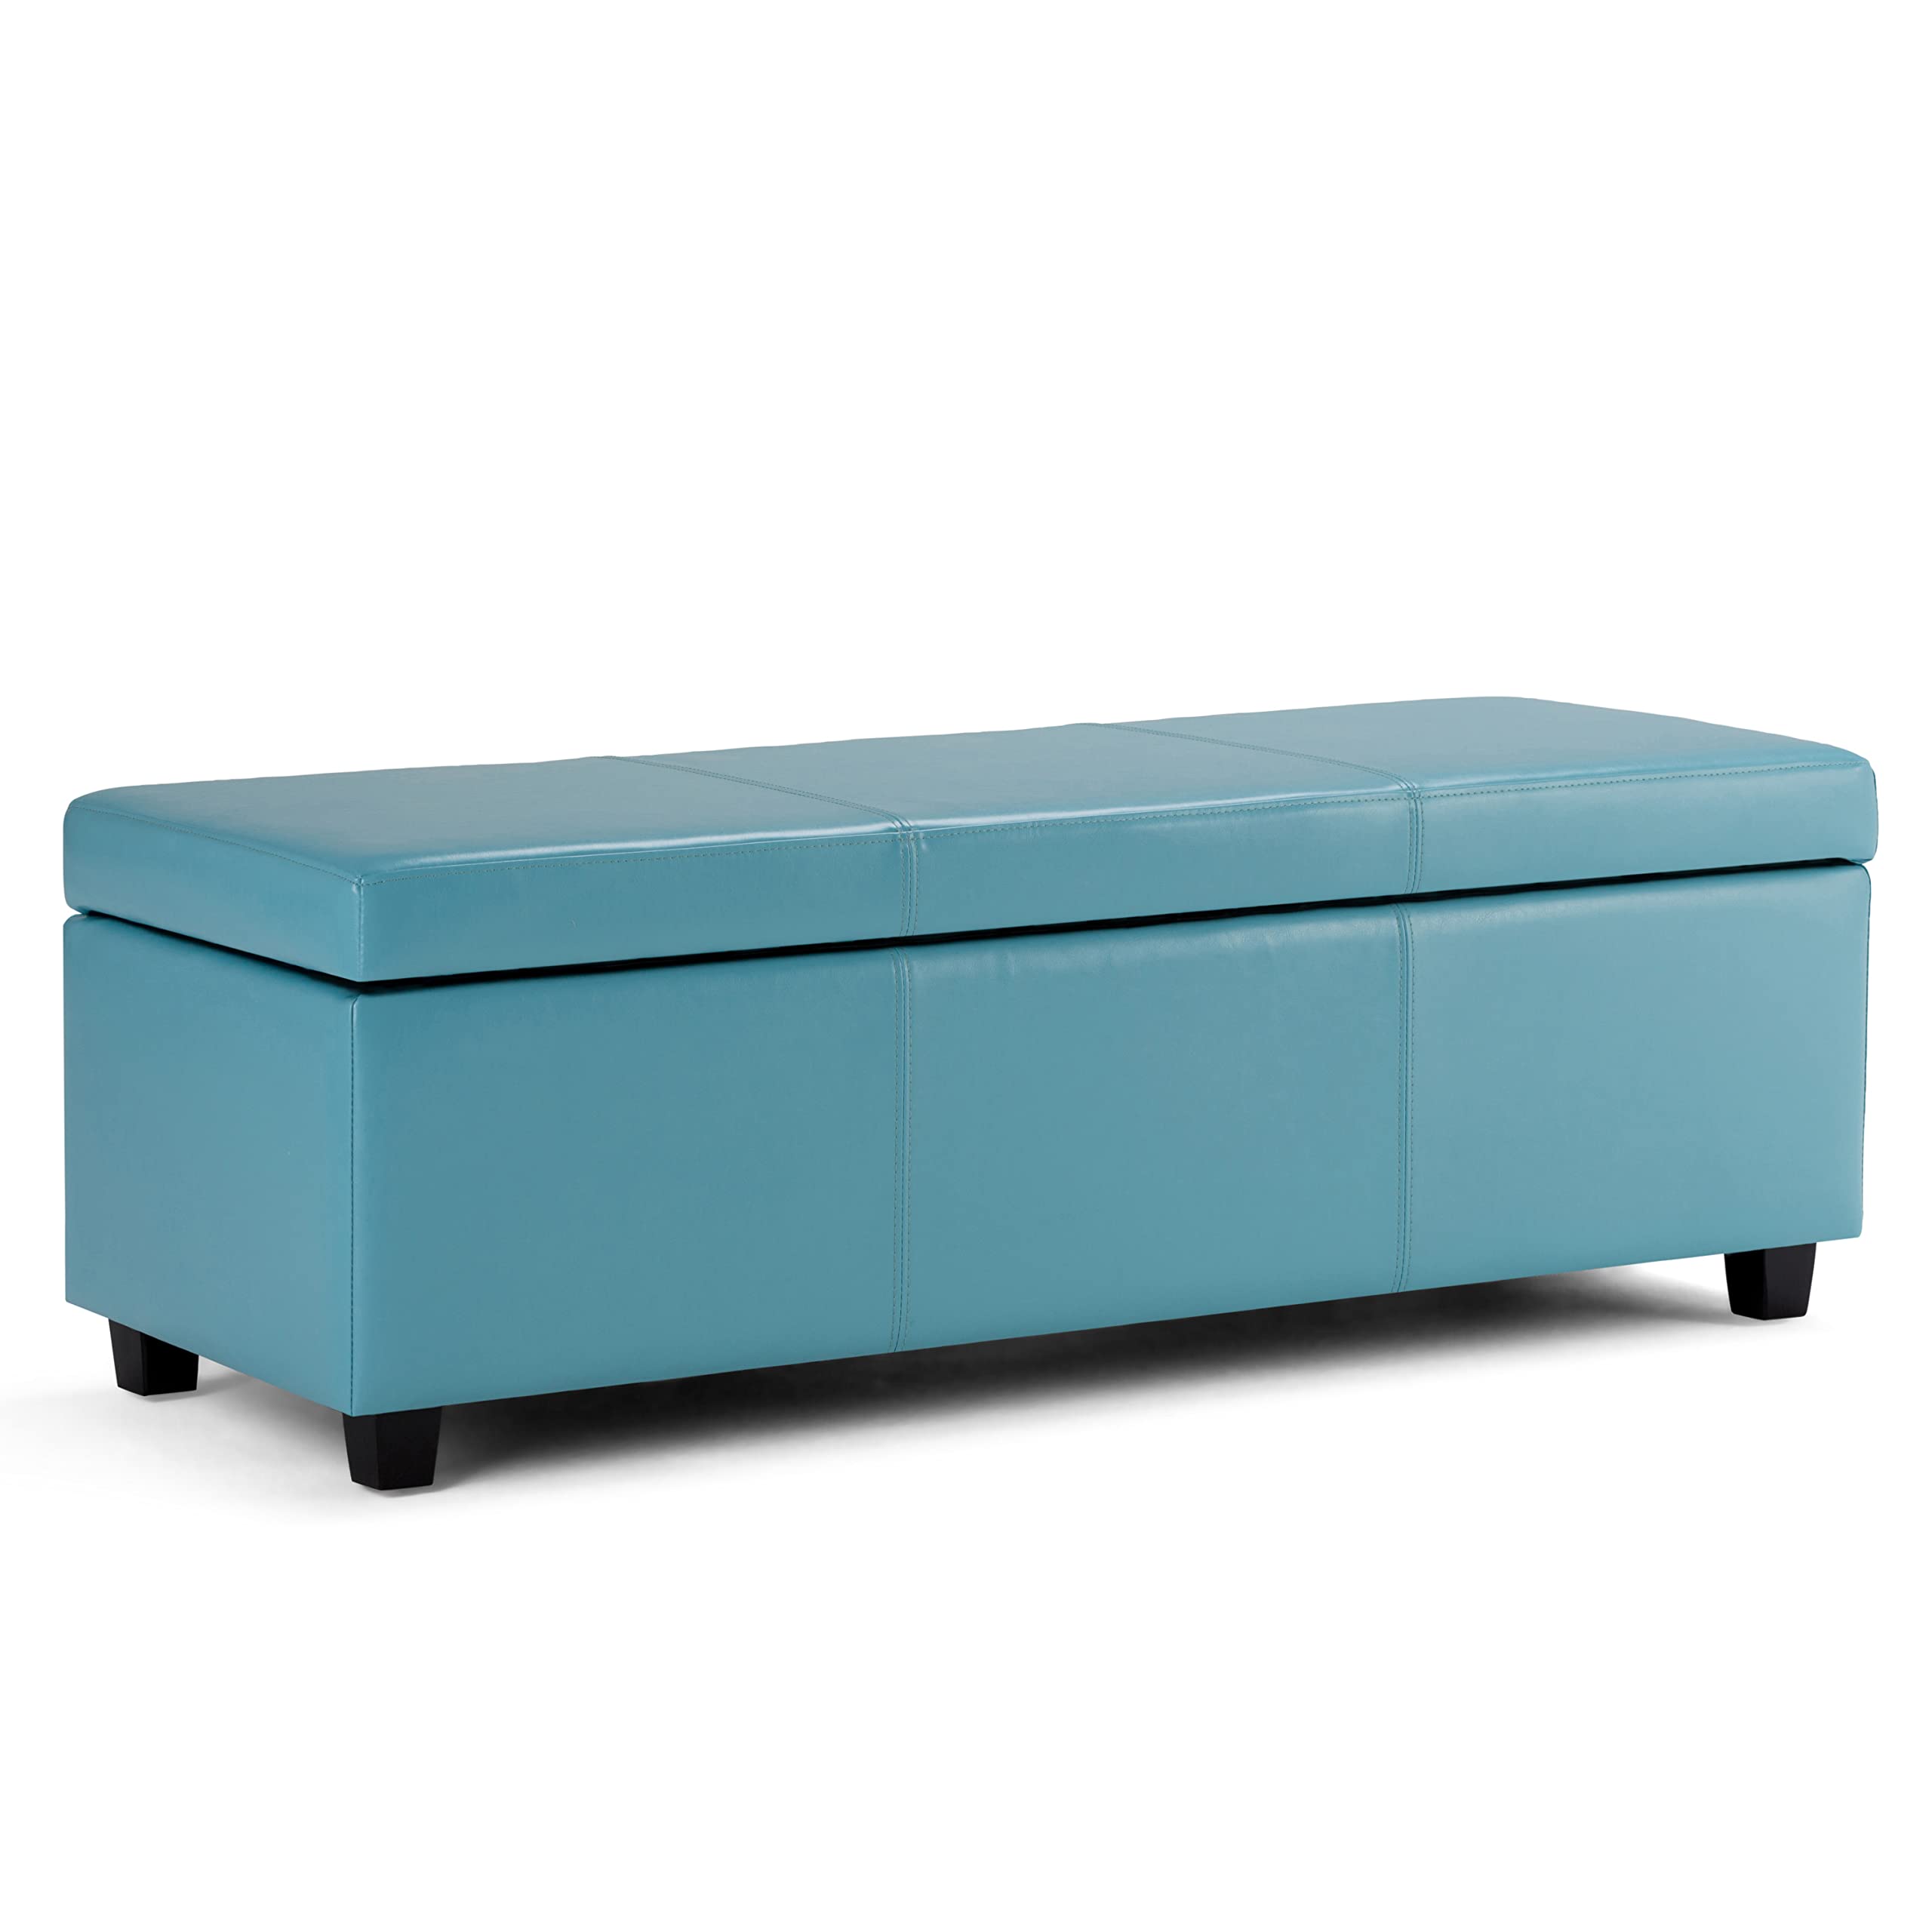 SIMPLIHOME Avalon 48 Inch Wide Contemporary Rectangle Storage Ottoman Bench in Soft Blue Vegan Faux Leather, For the Living Room